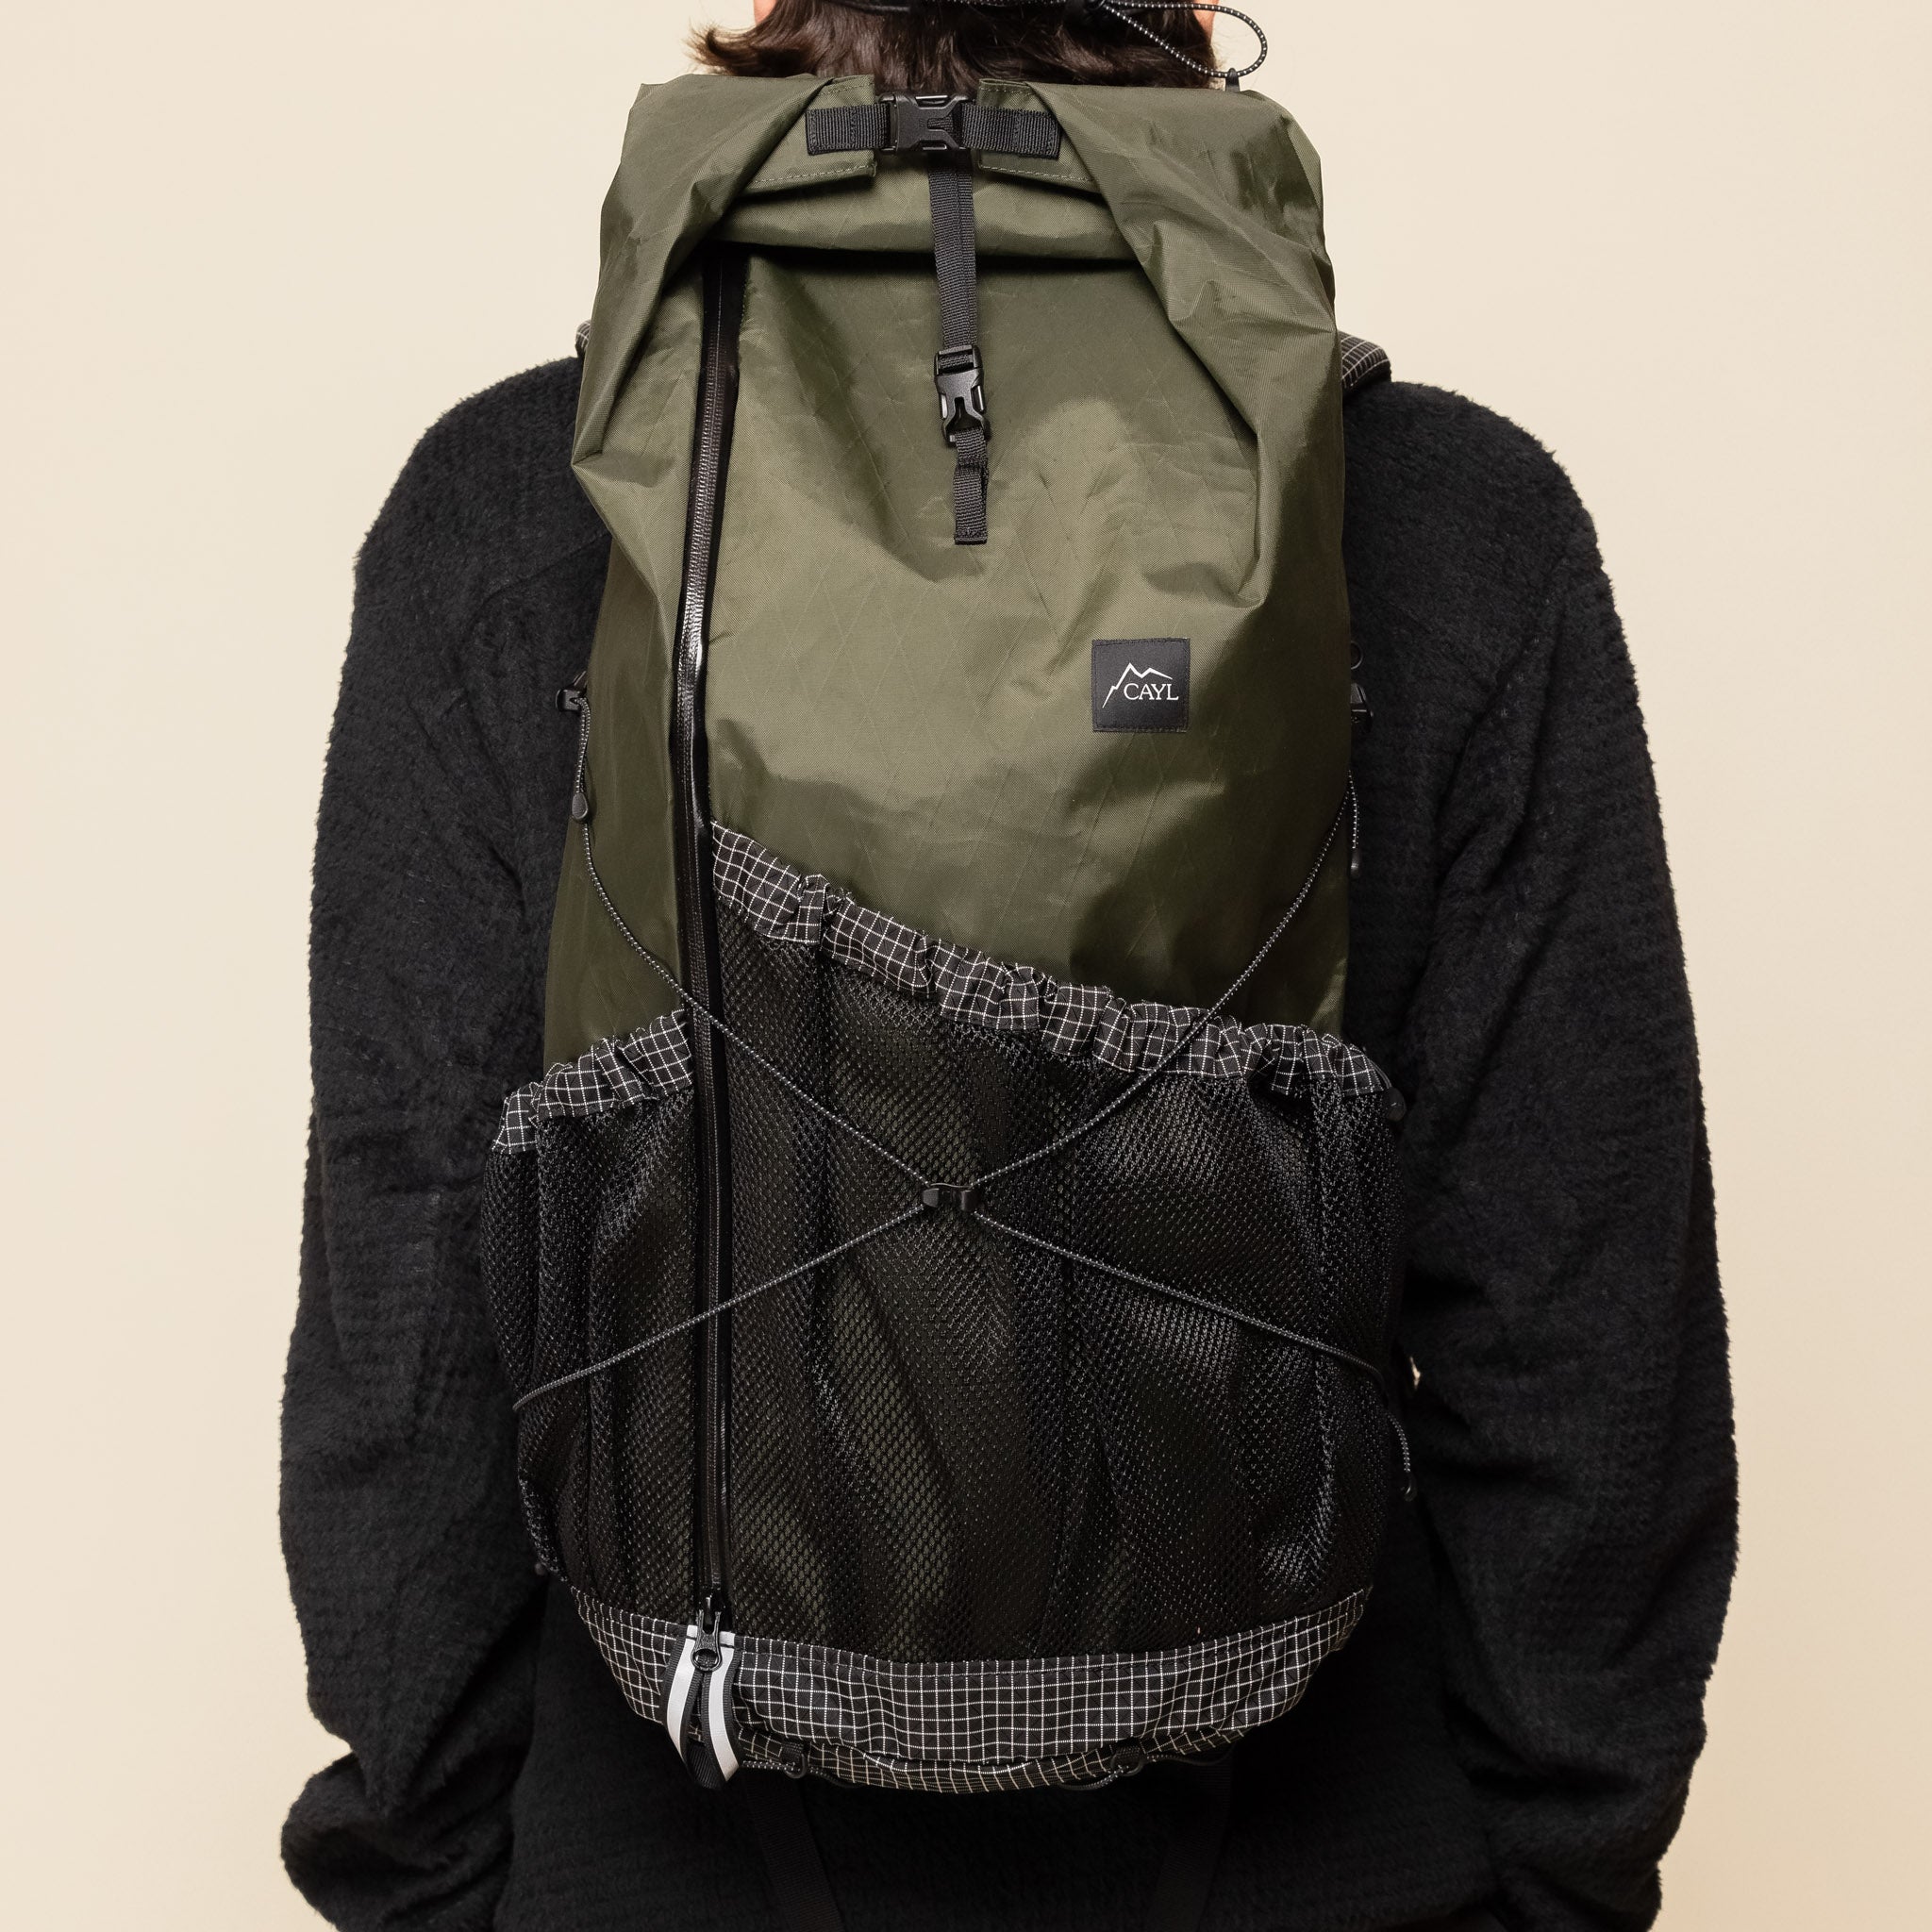 CAYL "Climb As You Love" - Mari Roll Top Backpack - Olive X-Pac "cayl stockists" "cayl backpack" "climb as you love"